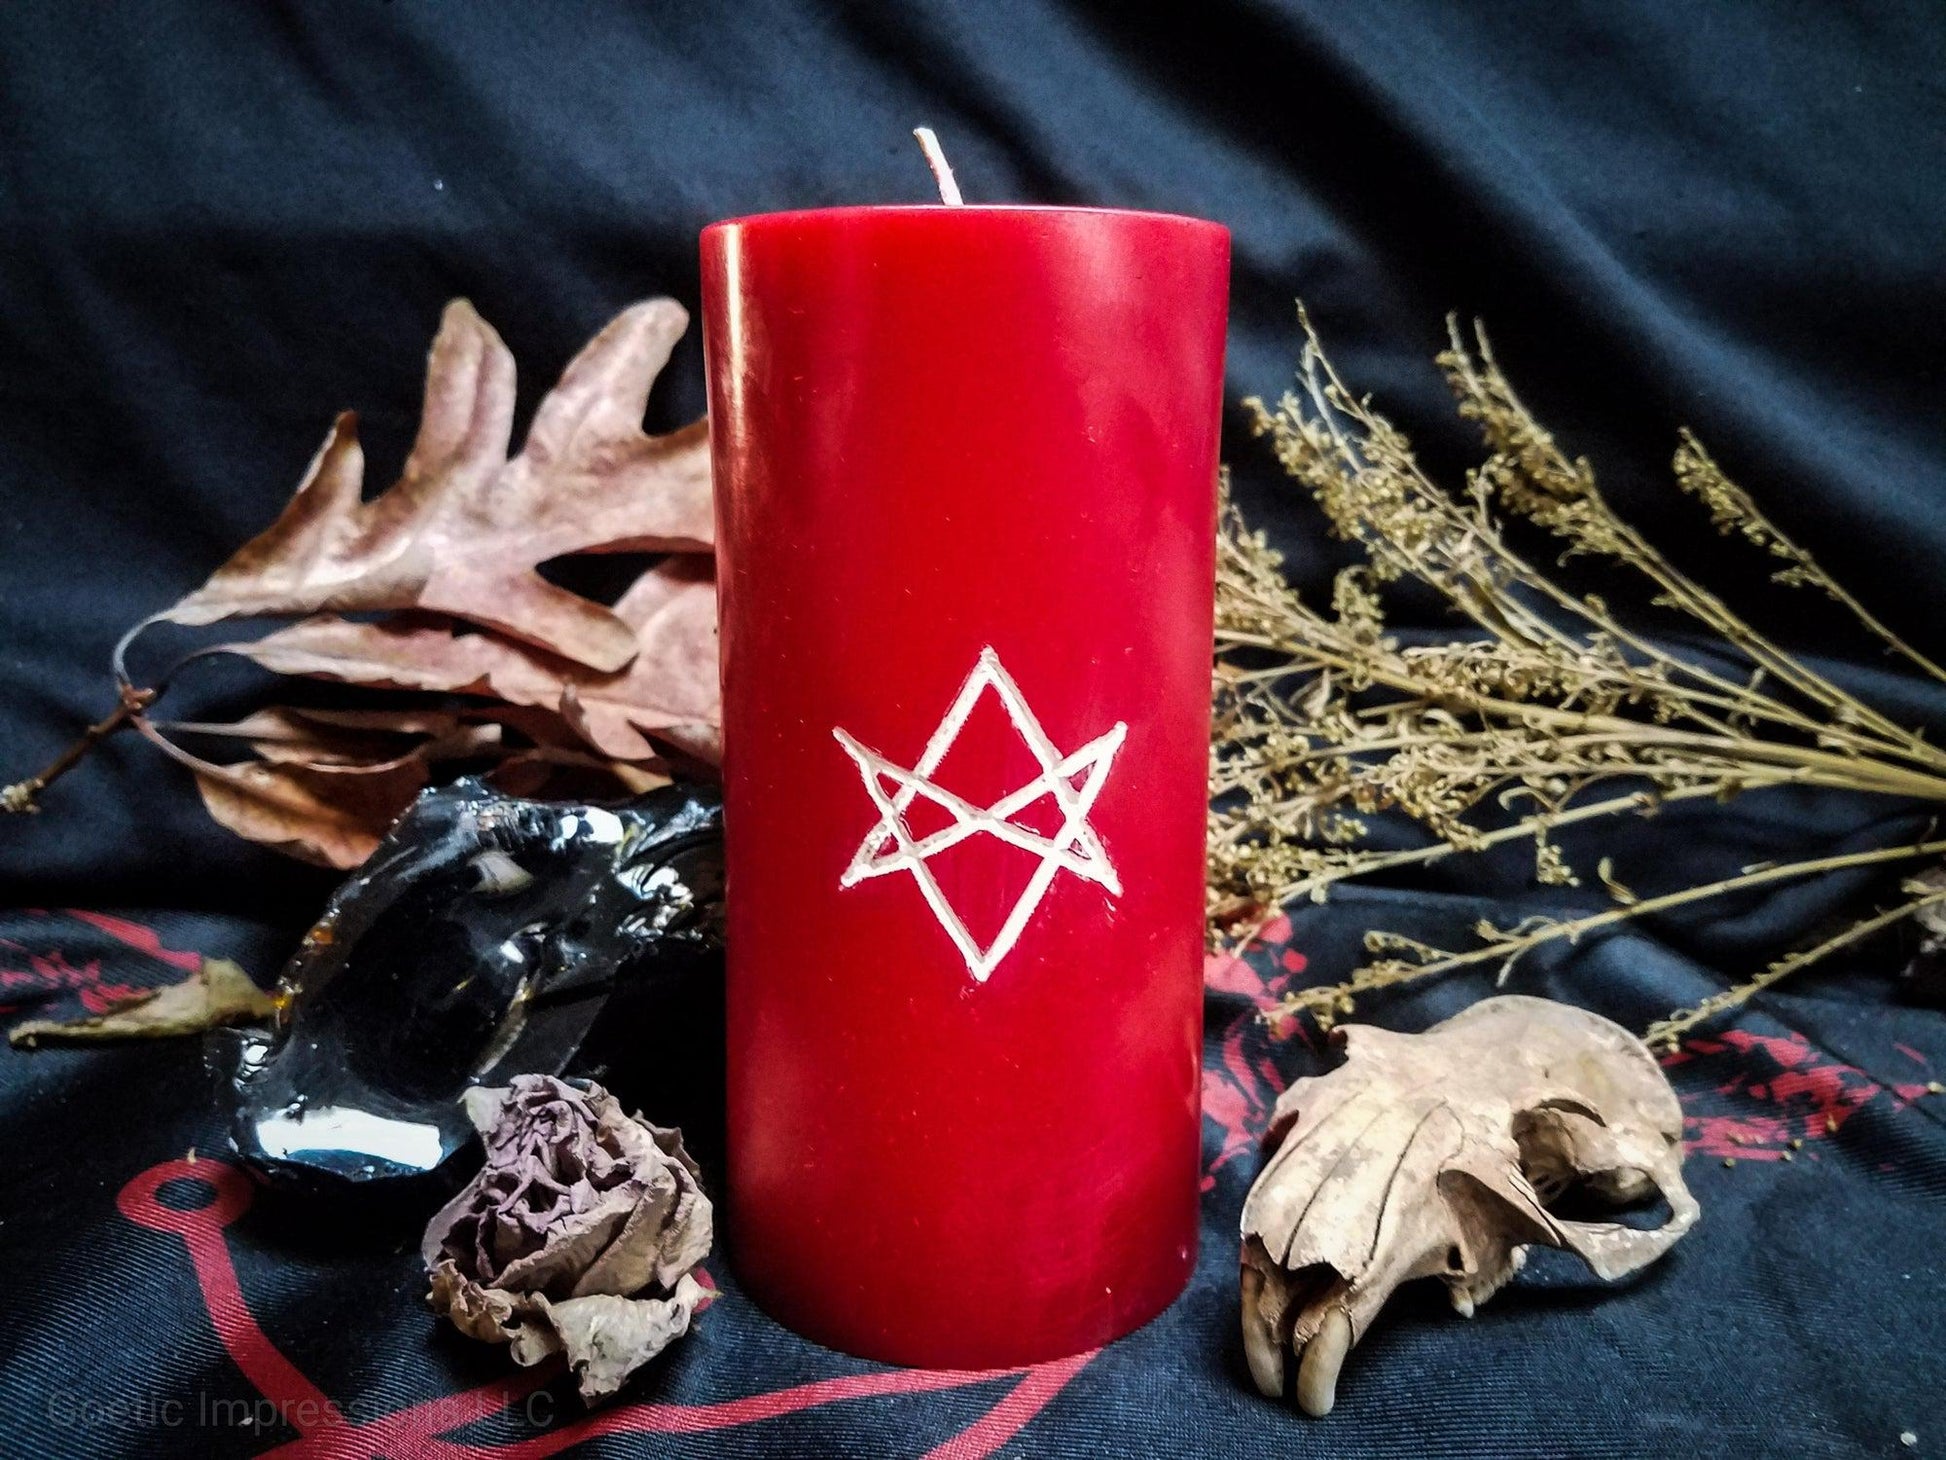 Red pillar candle with white unicursal hexagram sigil carved into it.